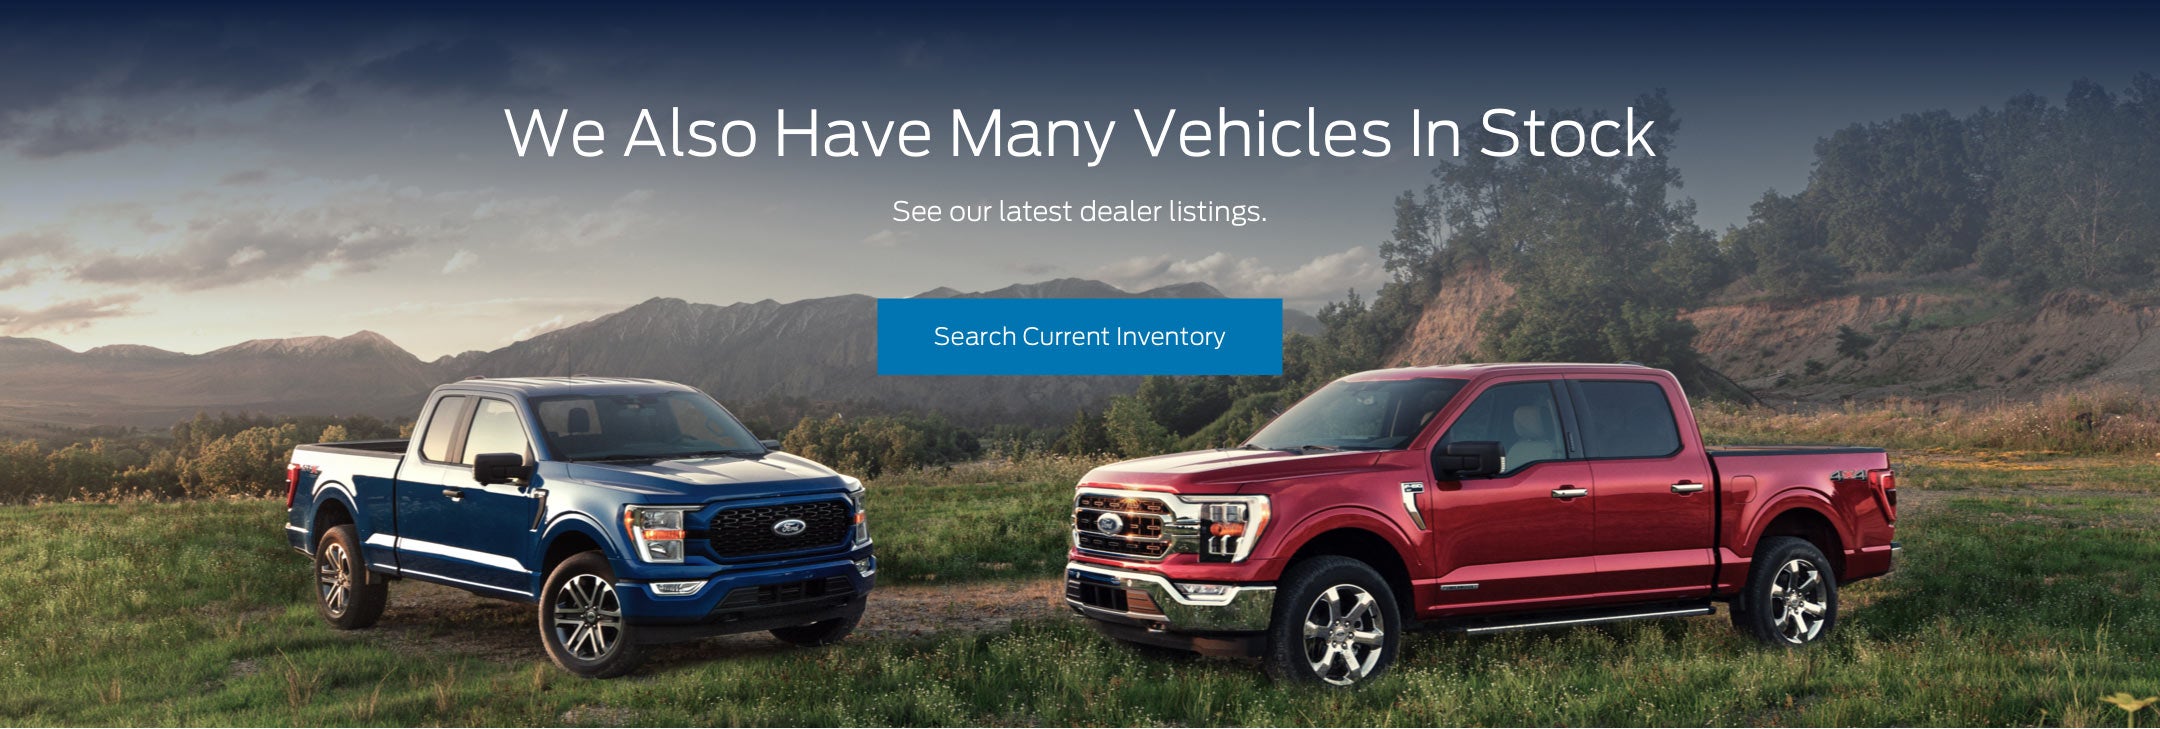 Ford vehicles in stock | D and D Motors, Inc. in Greer SC